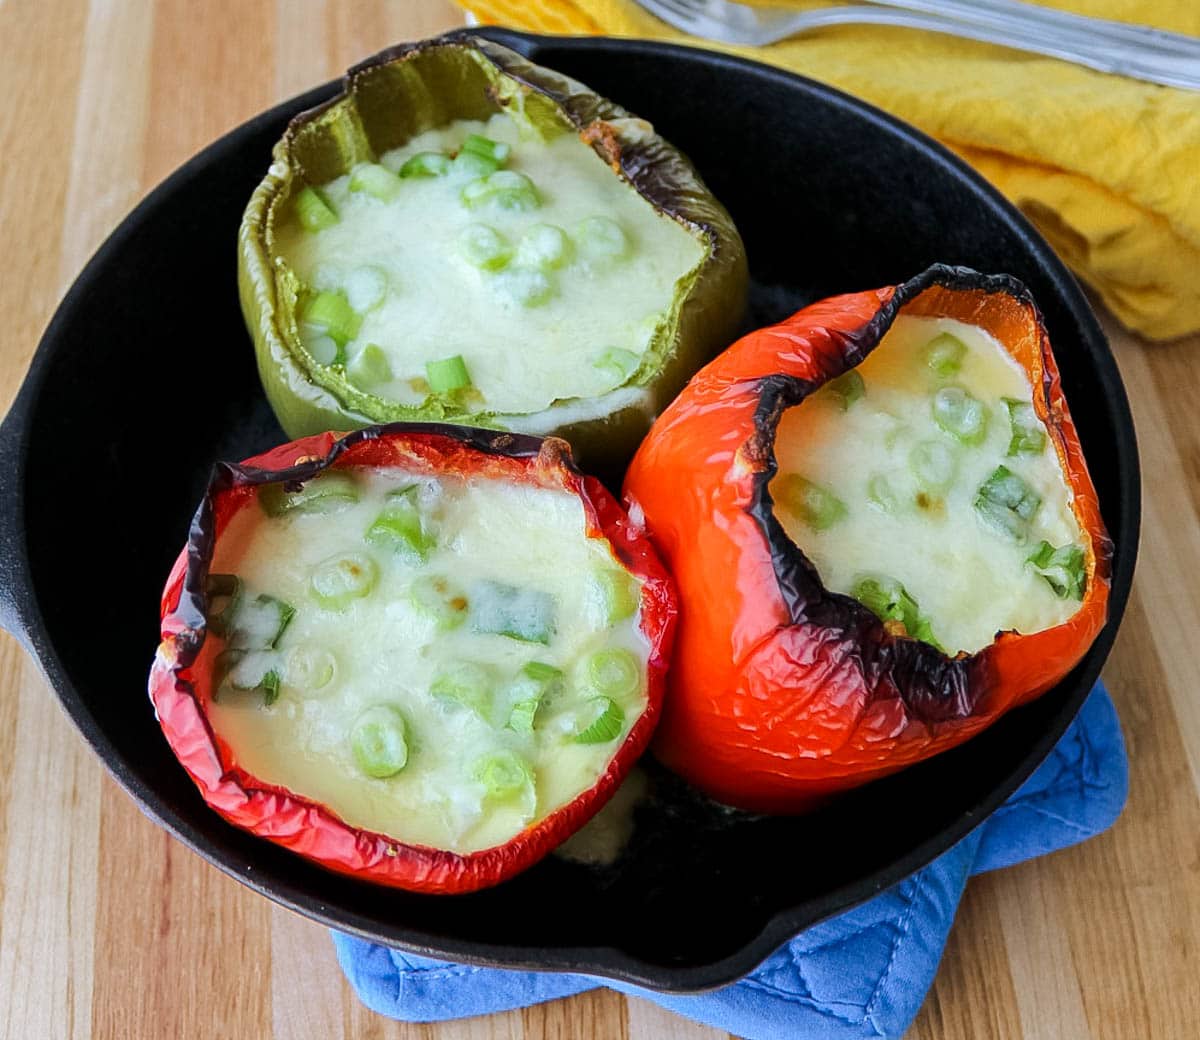 two red bell peppers and one green pepper filled with eggs, cheese, and green onions in a cast iron skillet on a blue hot pad on a wooden table.